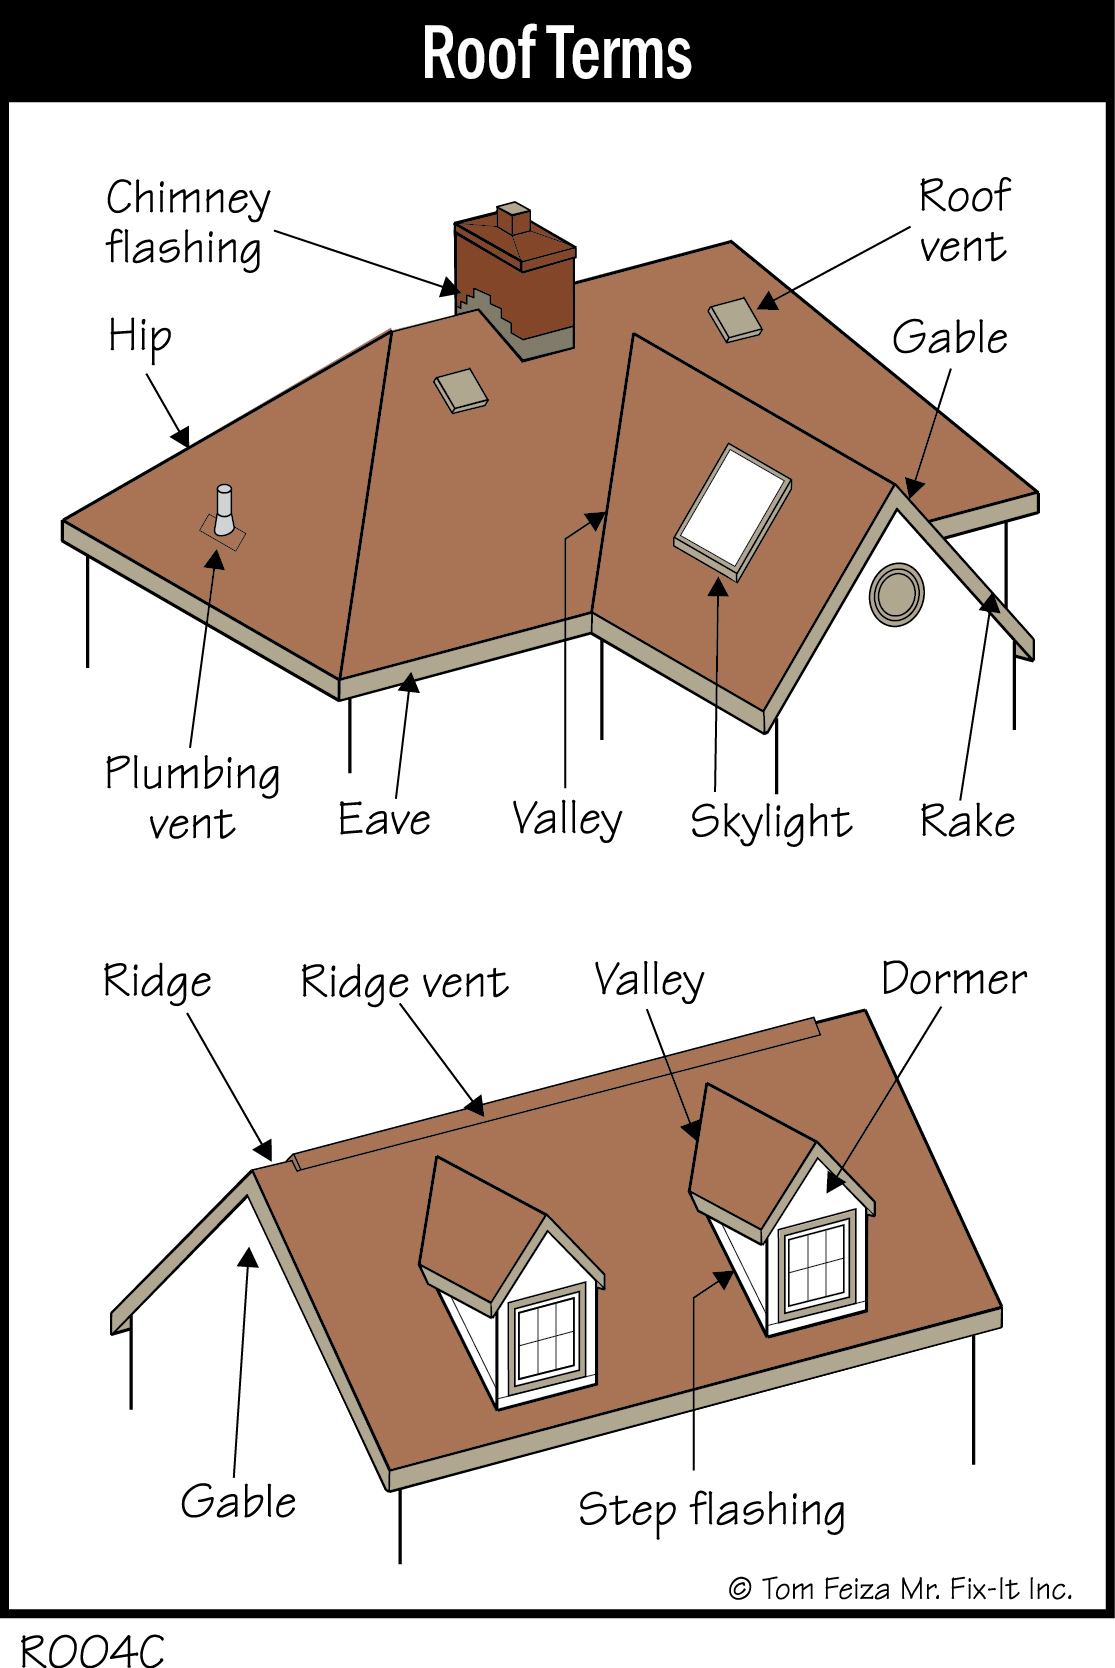 R004C - Roof Terms